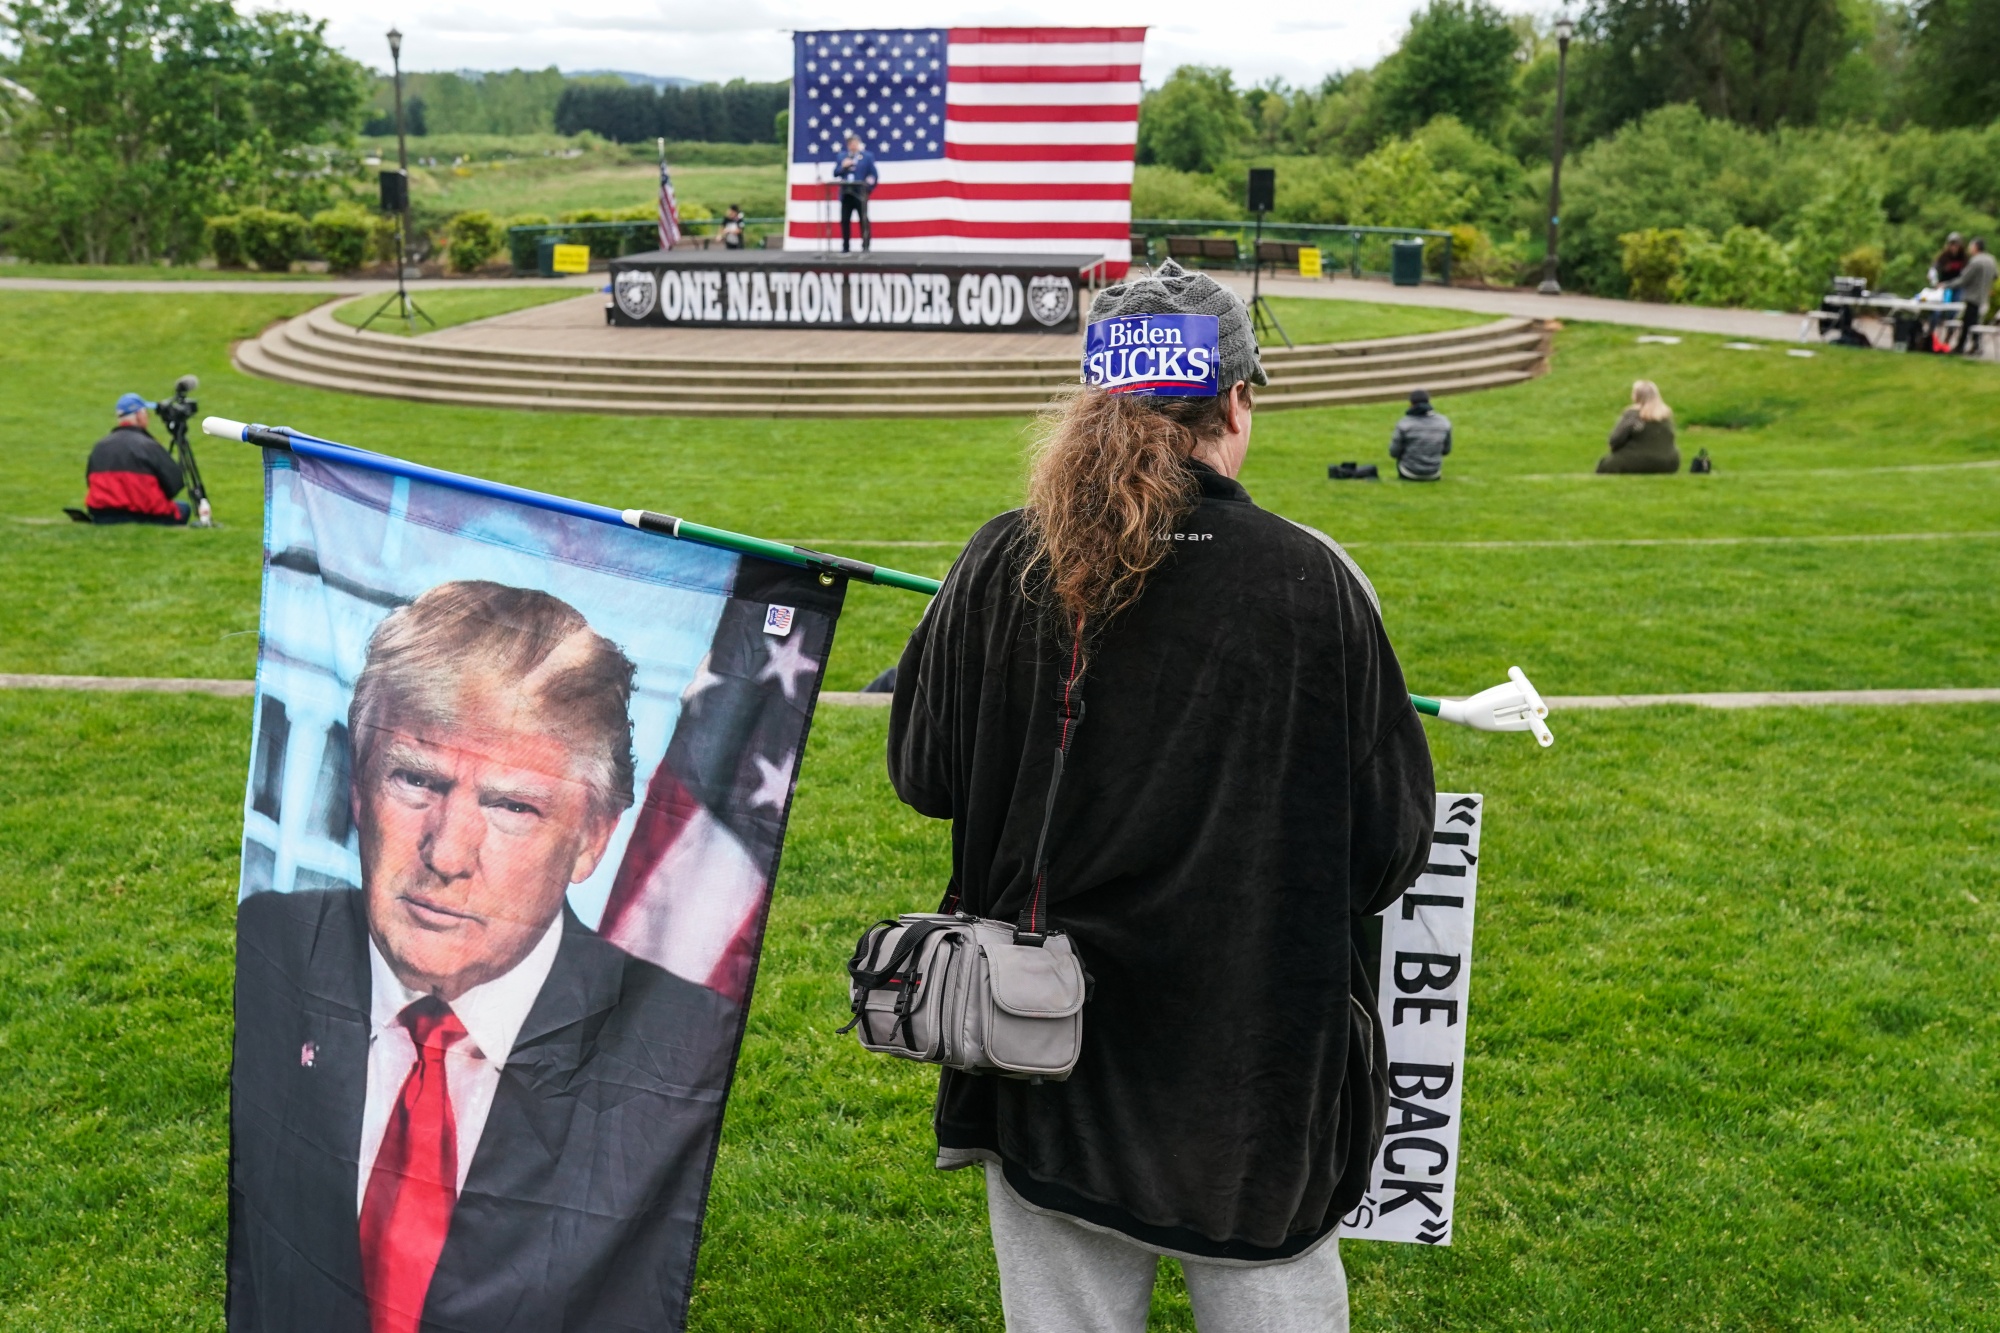 A 2nd Amendment rally on May 1, 2021 in Salem, Oregon. Since the Jan. 6 riot at the U.S. Capitol, right-wing organizations have often targeted state capitols and local government sites.&nbsp;